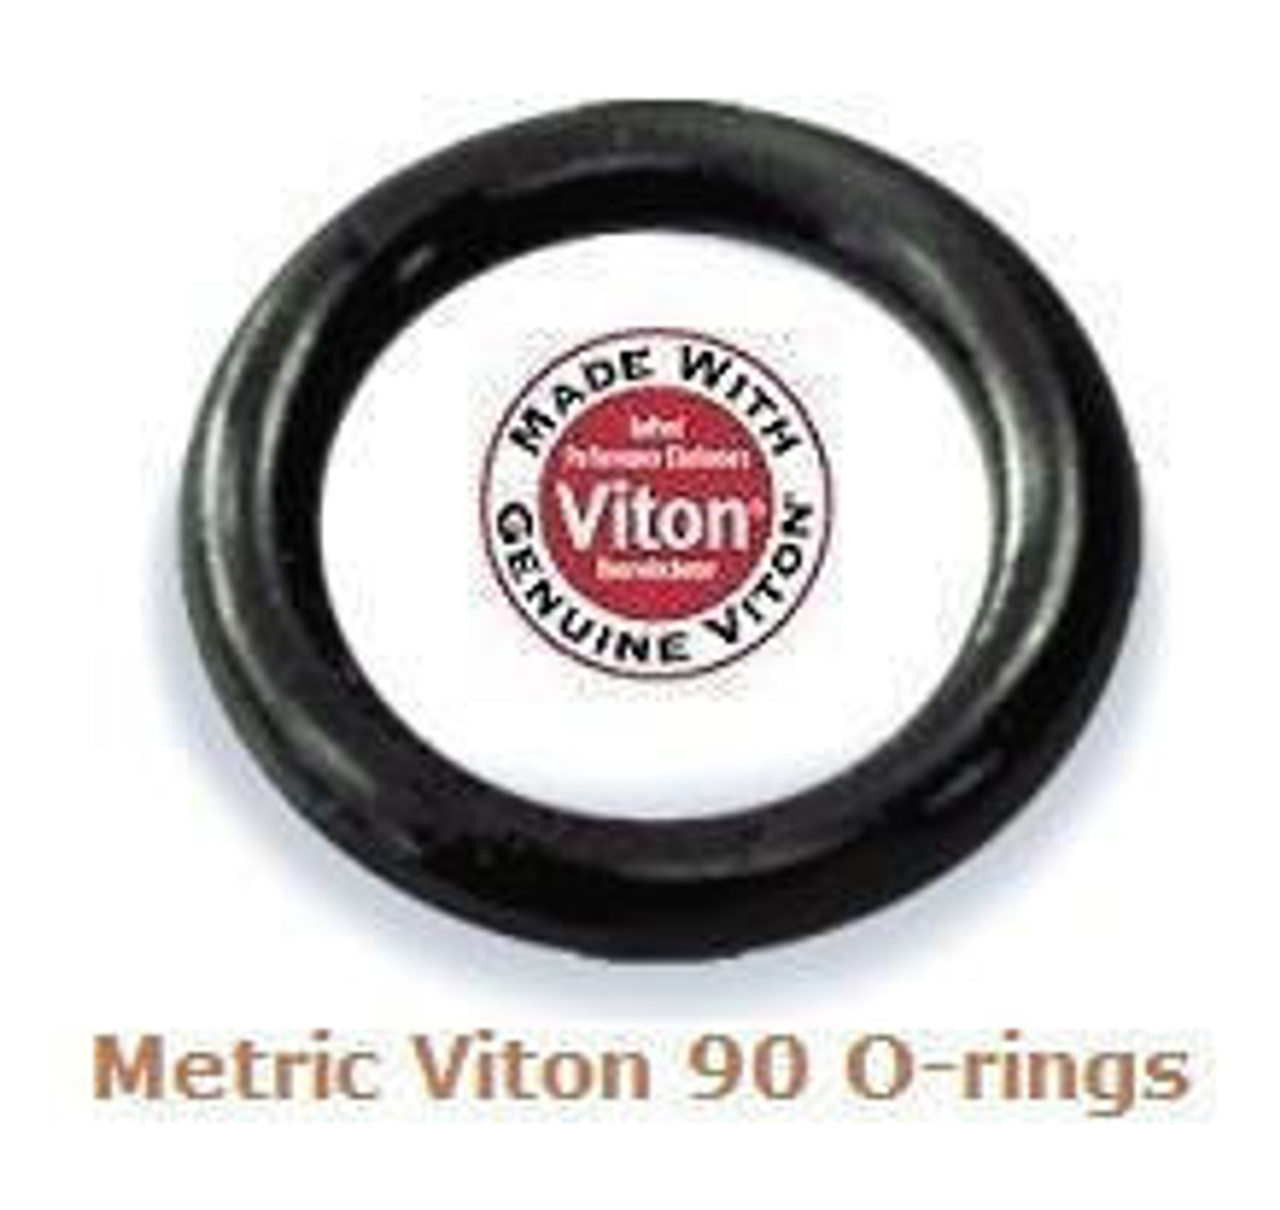 FKM 90 O-ring 45 x 2.5mm Price for 1 pc